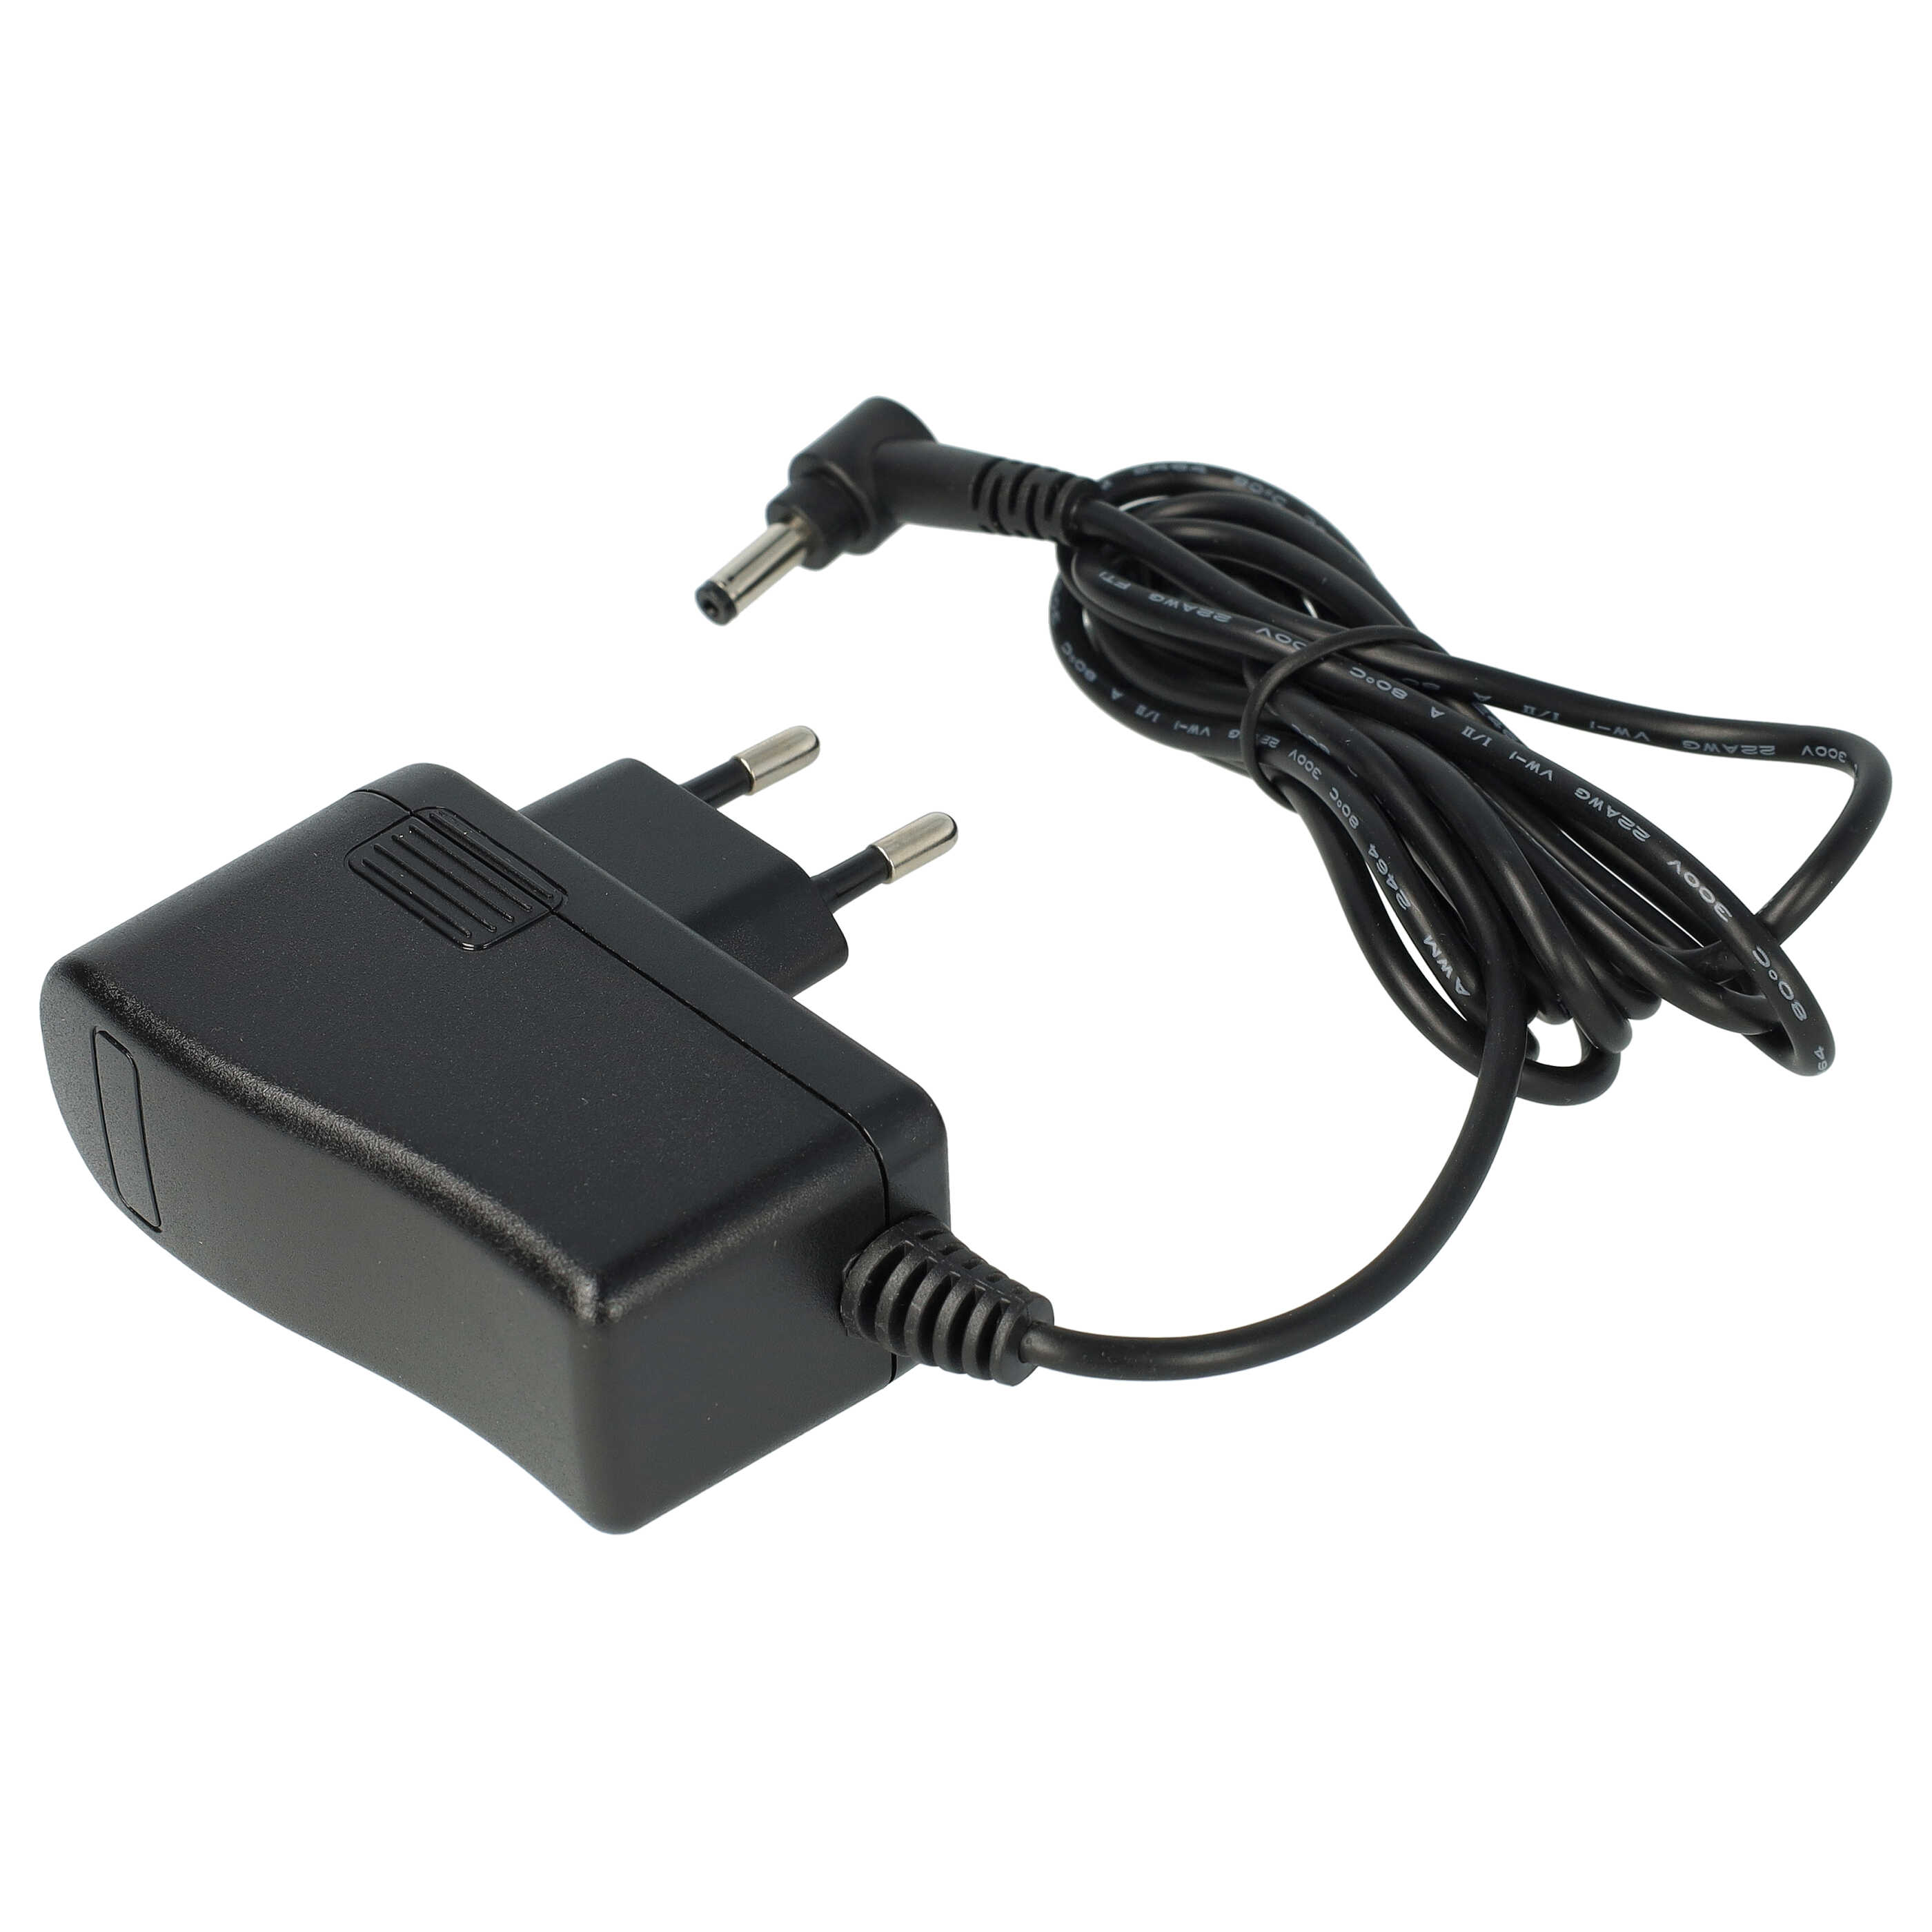 Charger replaces iRobot S012AXV1200100, 4408471 for iRobotRobot Vacuum Cleaner